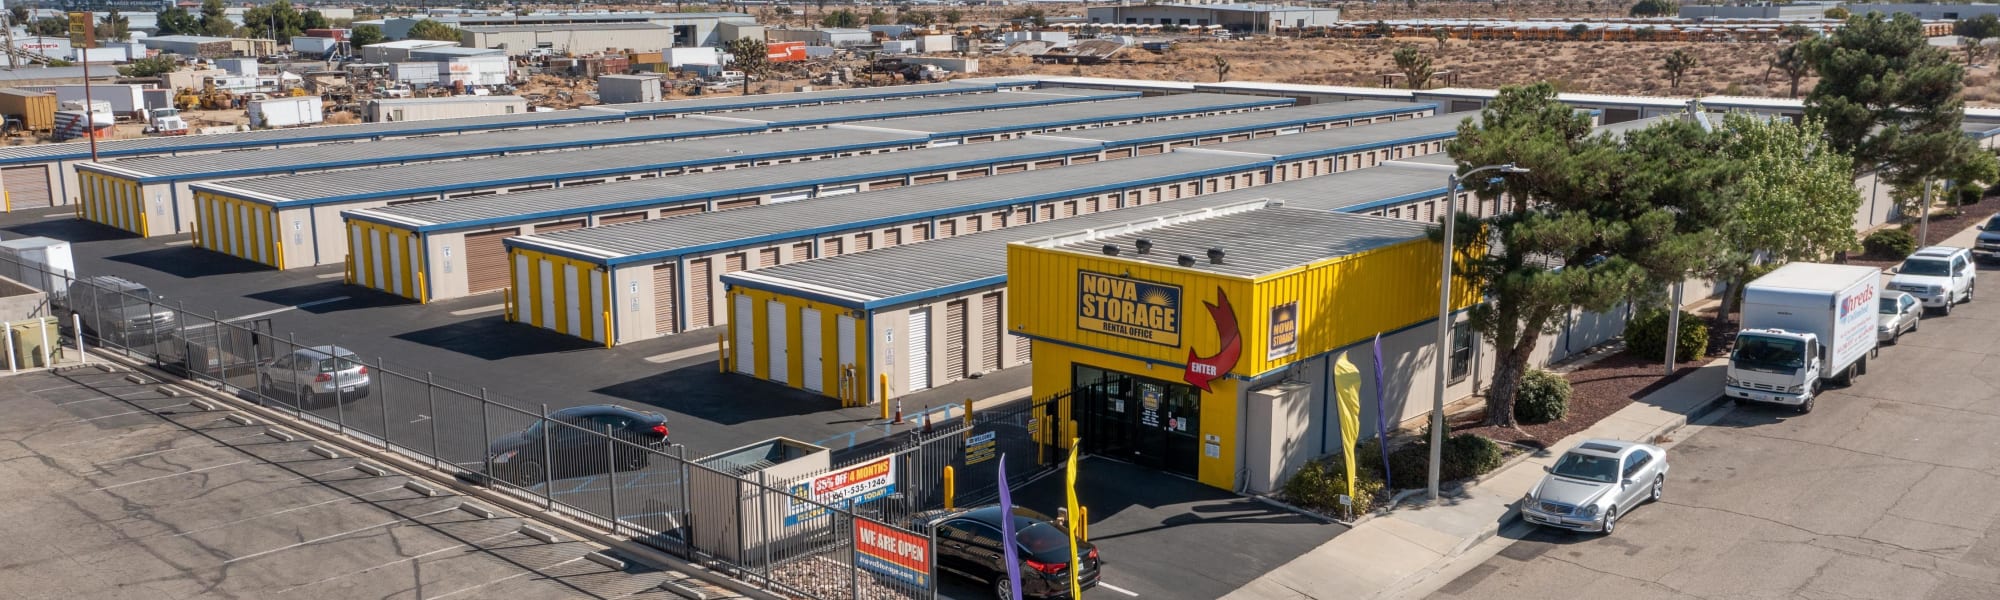 Hours and directions for Nova Storage in Lancaster, California